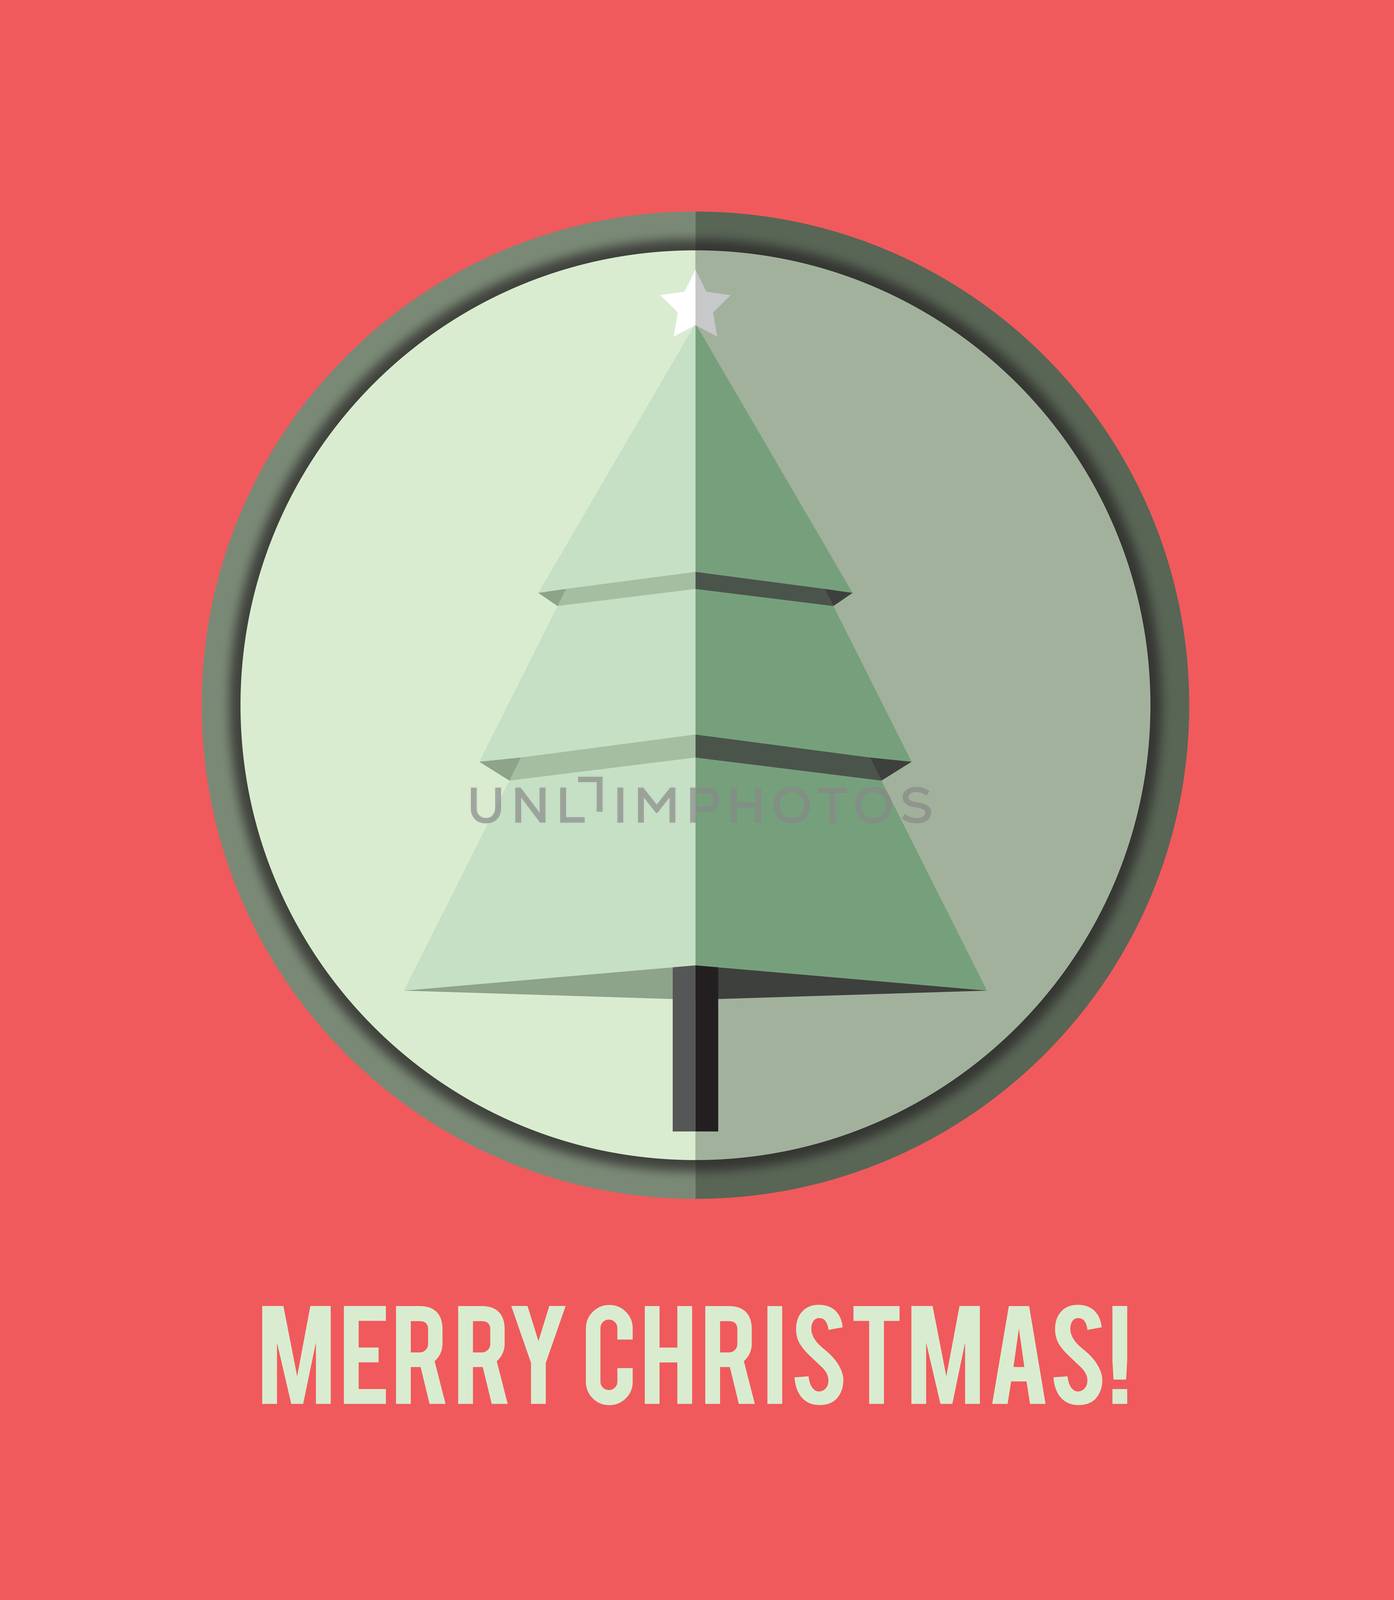 Flat design Christmas card. by Zzoplanet